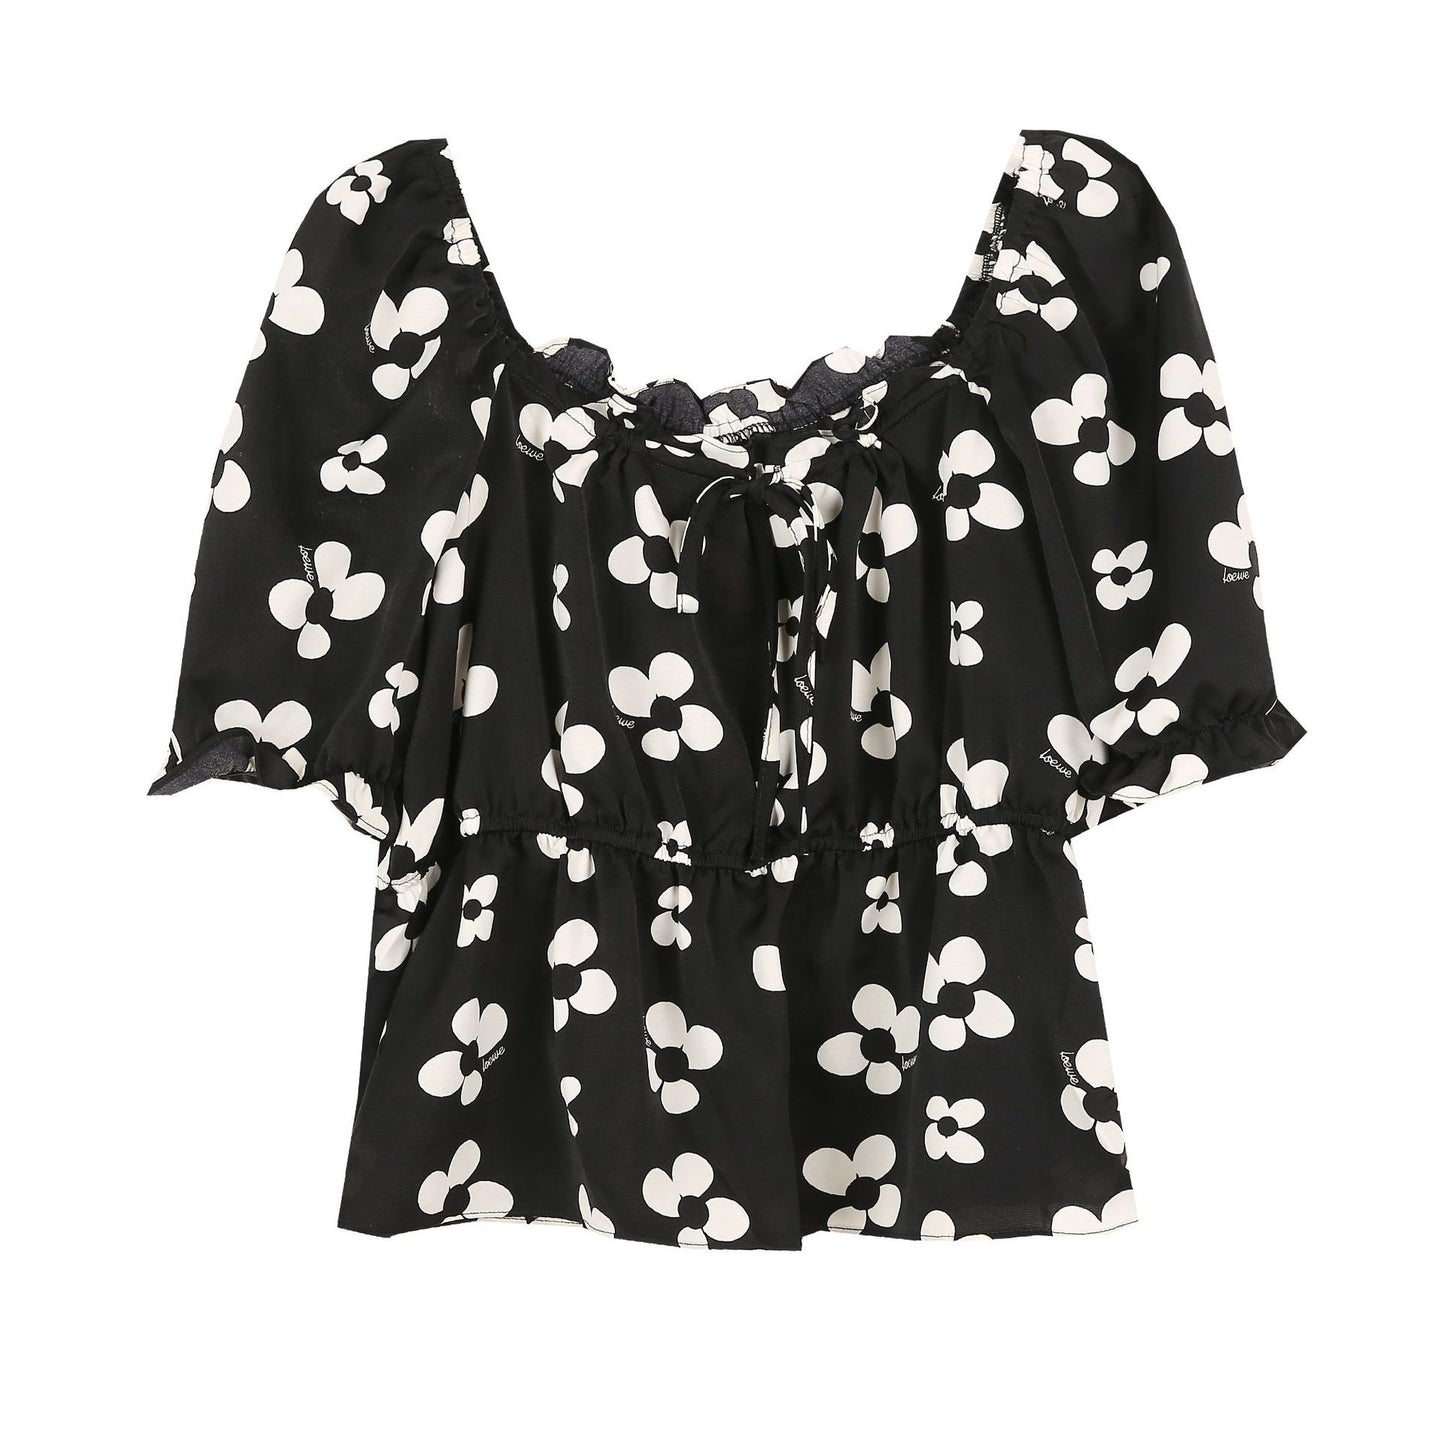 Floral Printed Chiffon Tops with Short Sleeves